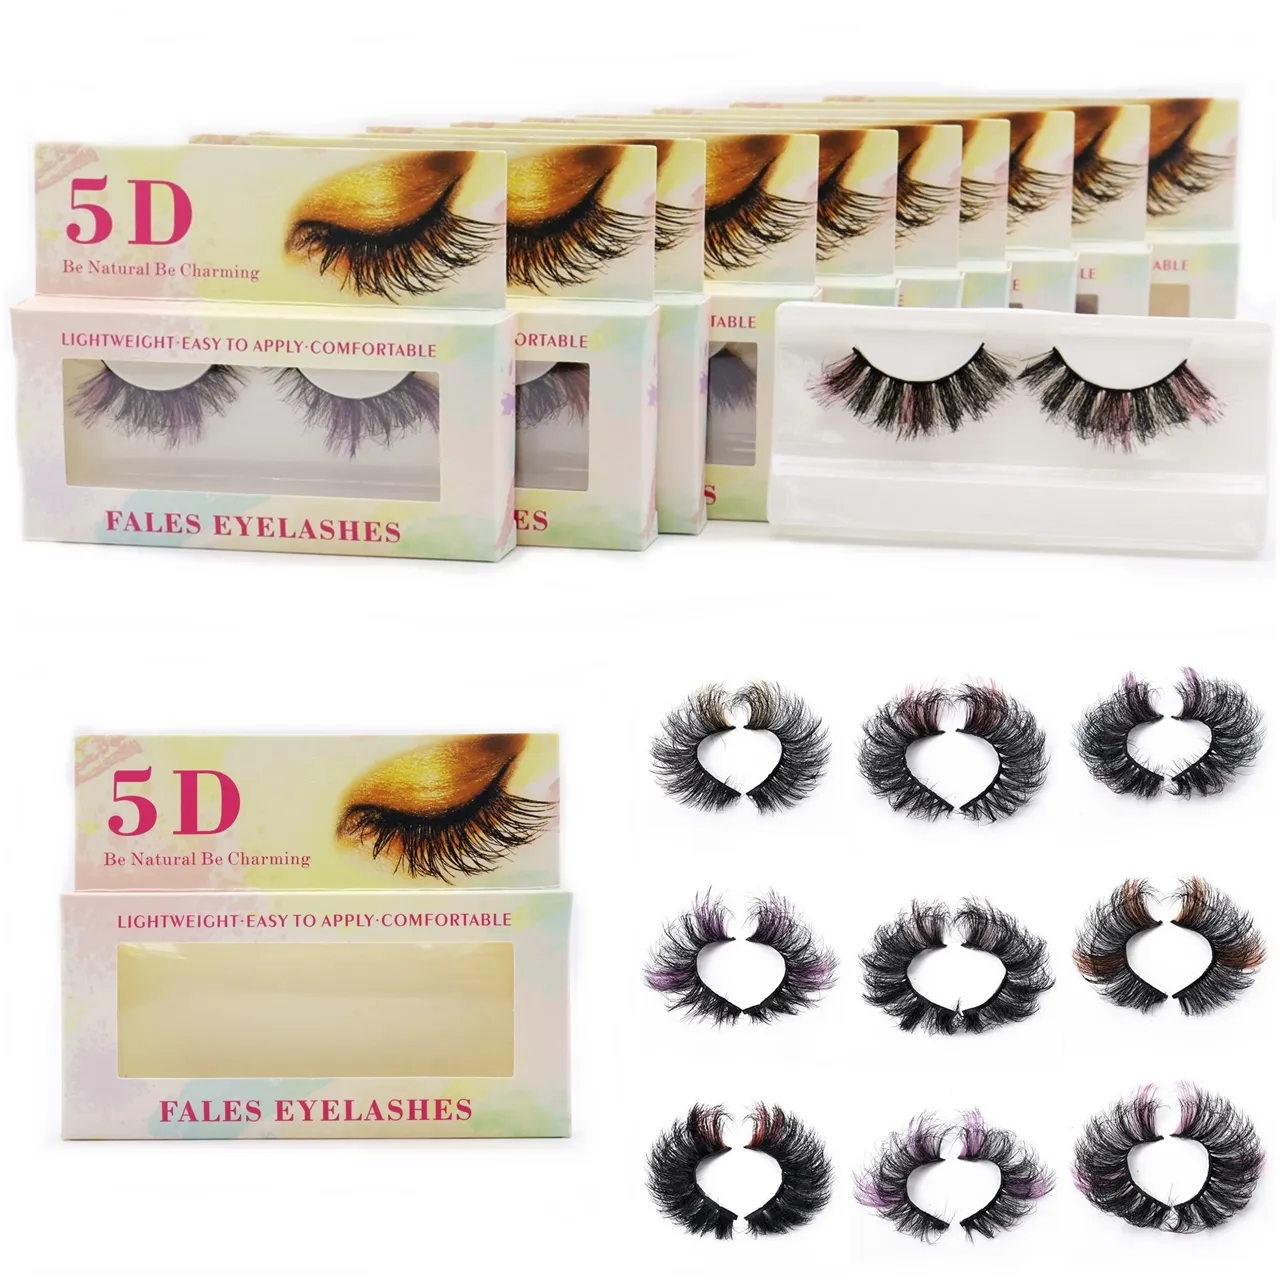 Colored 3D Mink Lashes with Paper Box Color Fuax Mink False Eyelashes Dramatic Fluffy Thick Colorful 5D Curl Fake Eyelash for Cosplay Party Eyes Makeup Extension